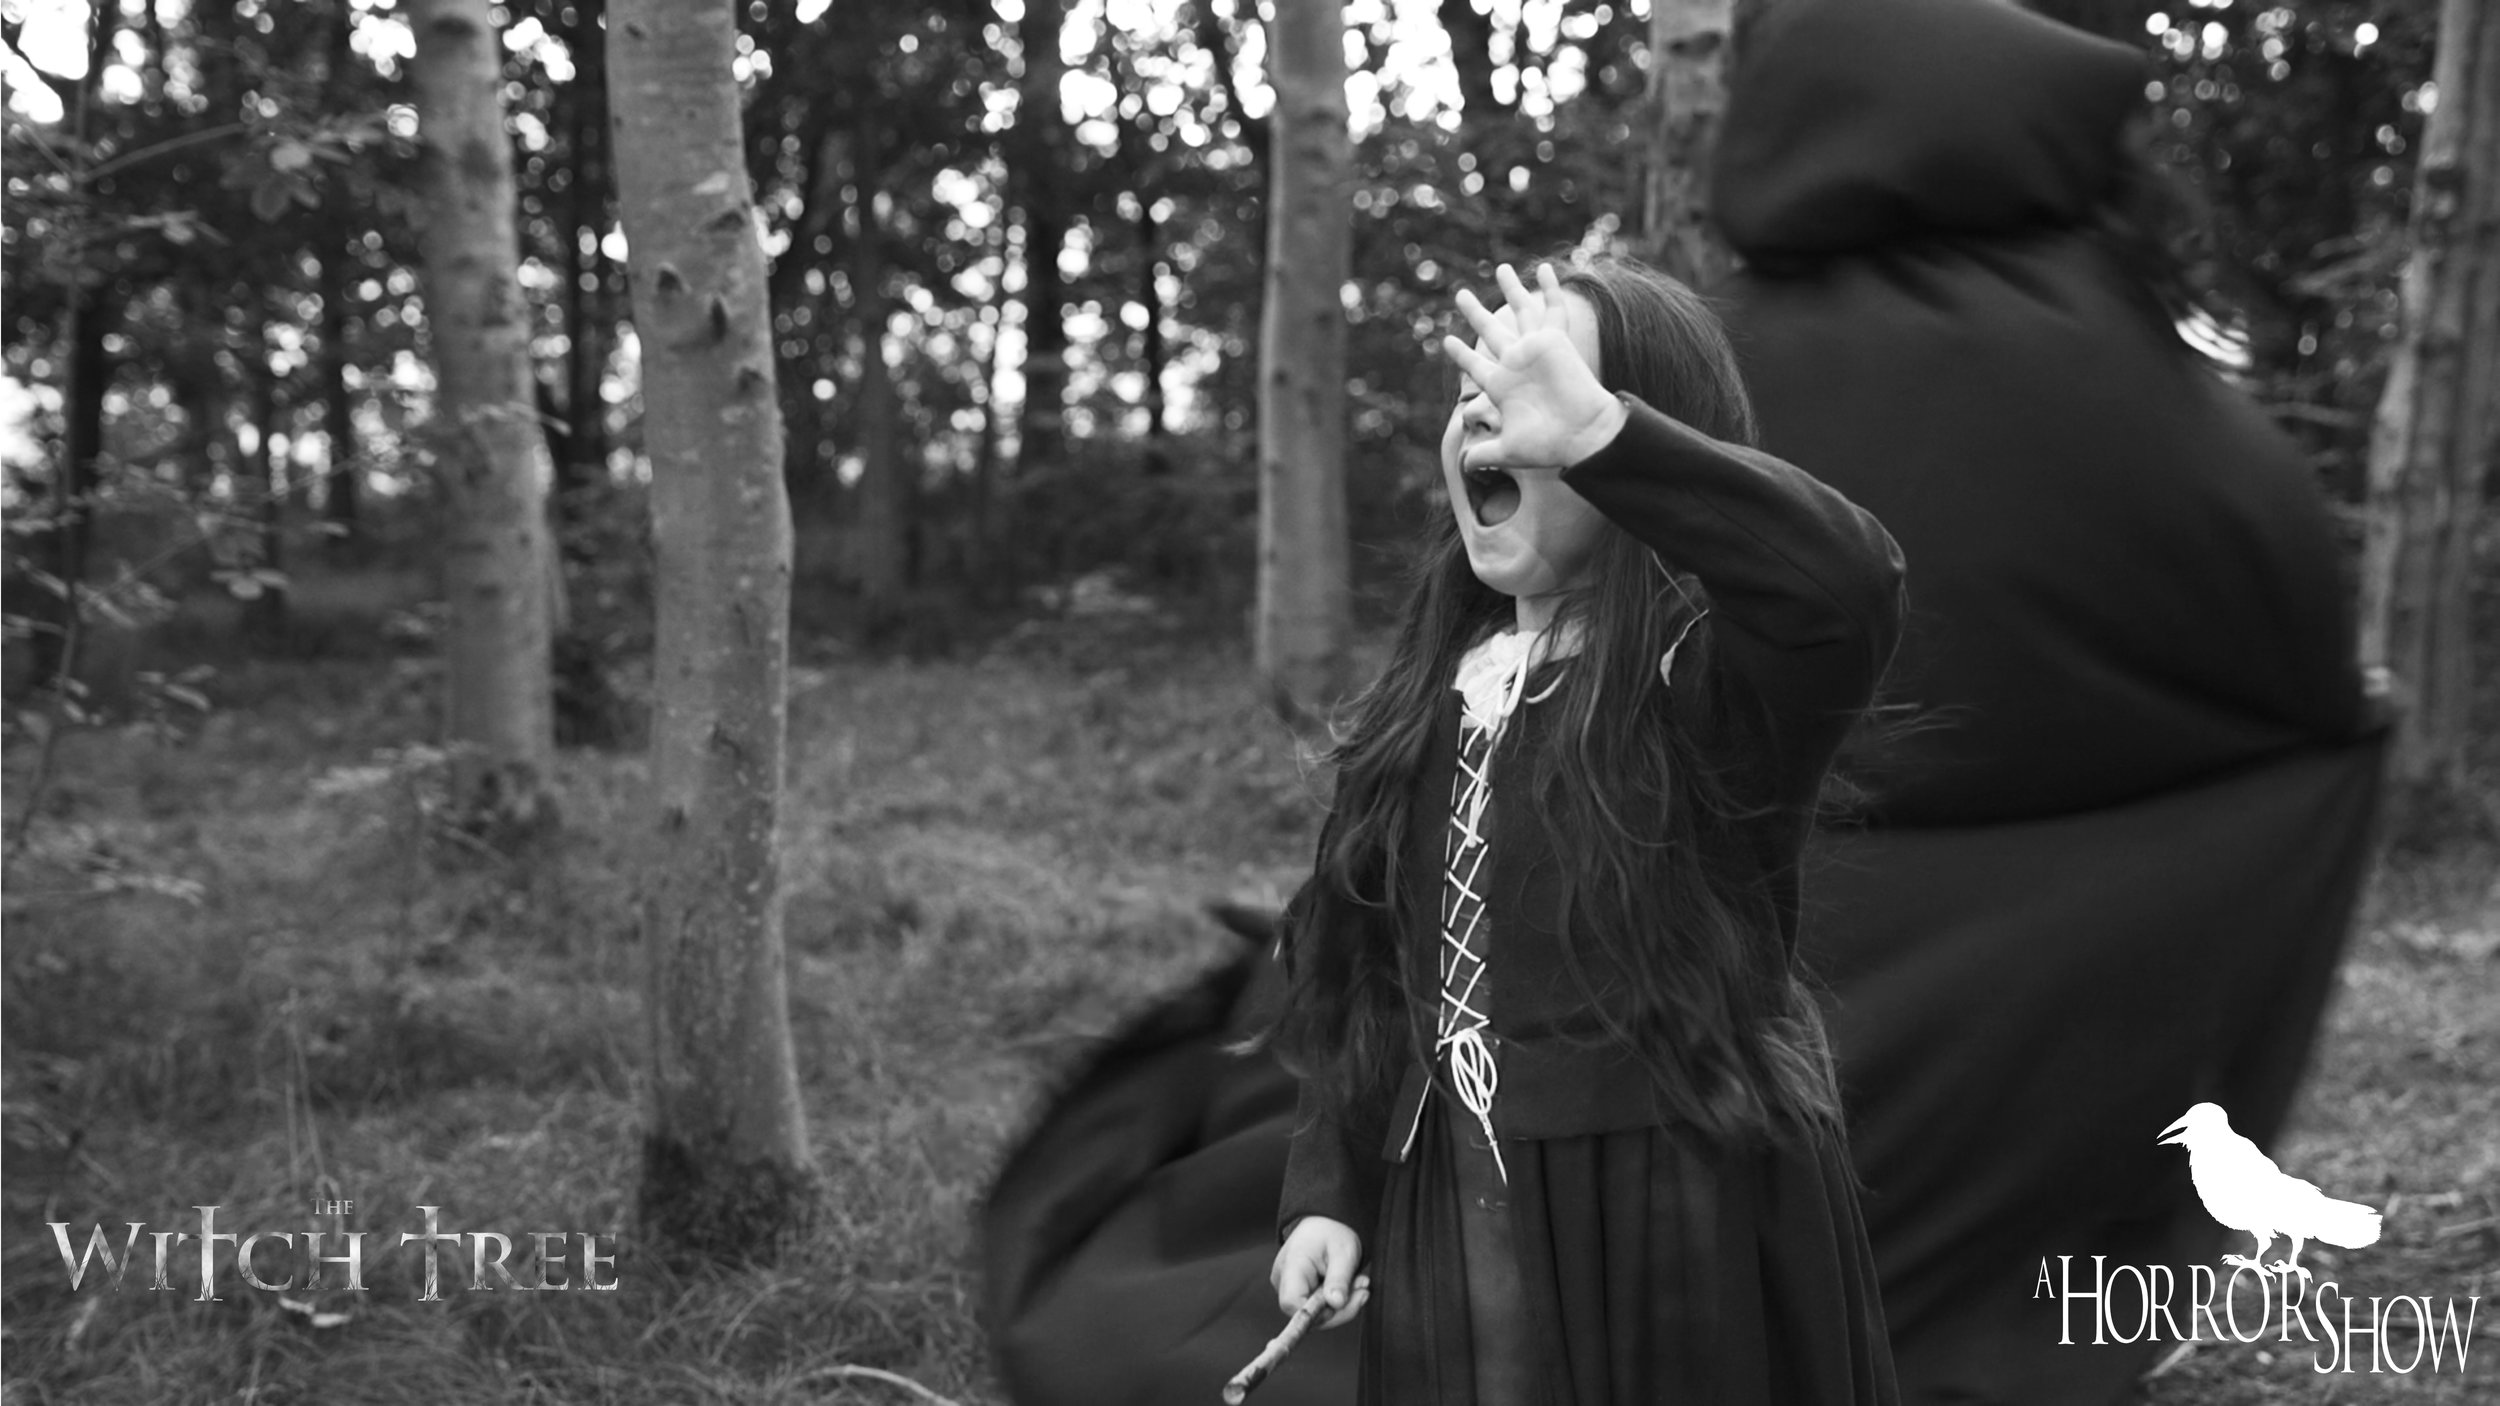  Scarlet Sargent on the Set of The Witch Tree. 